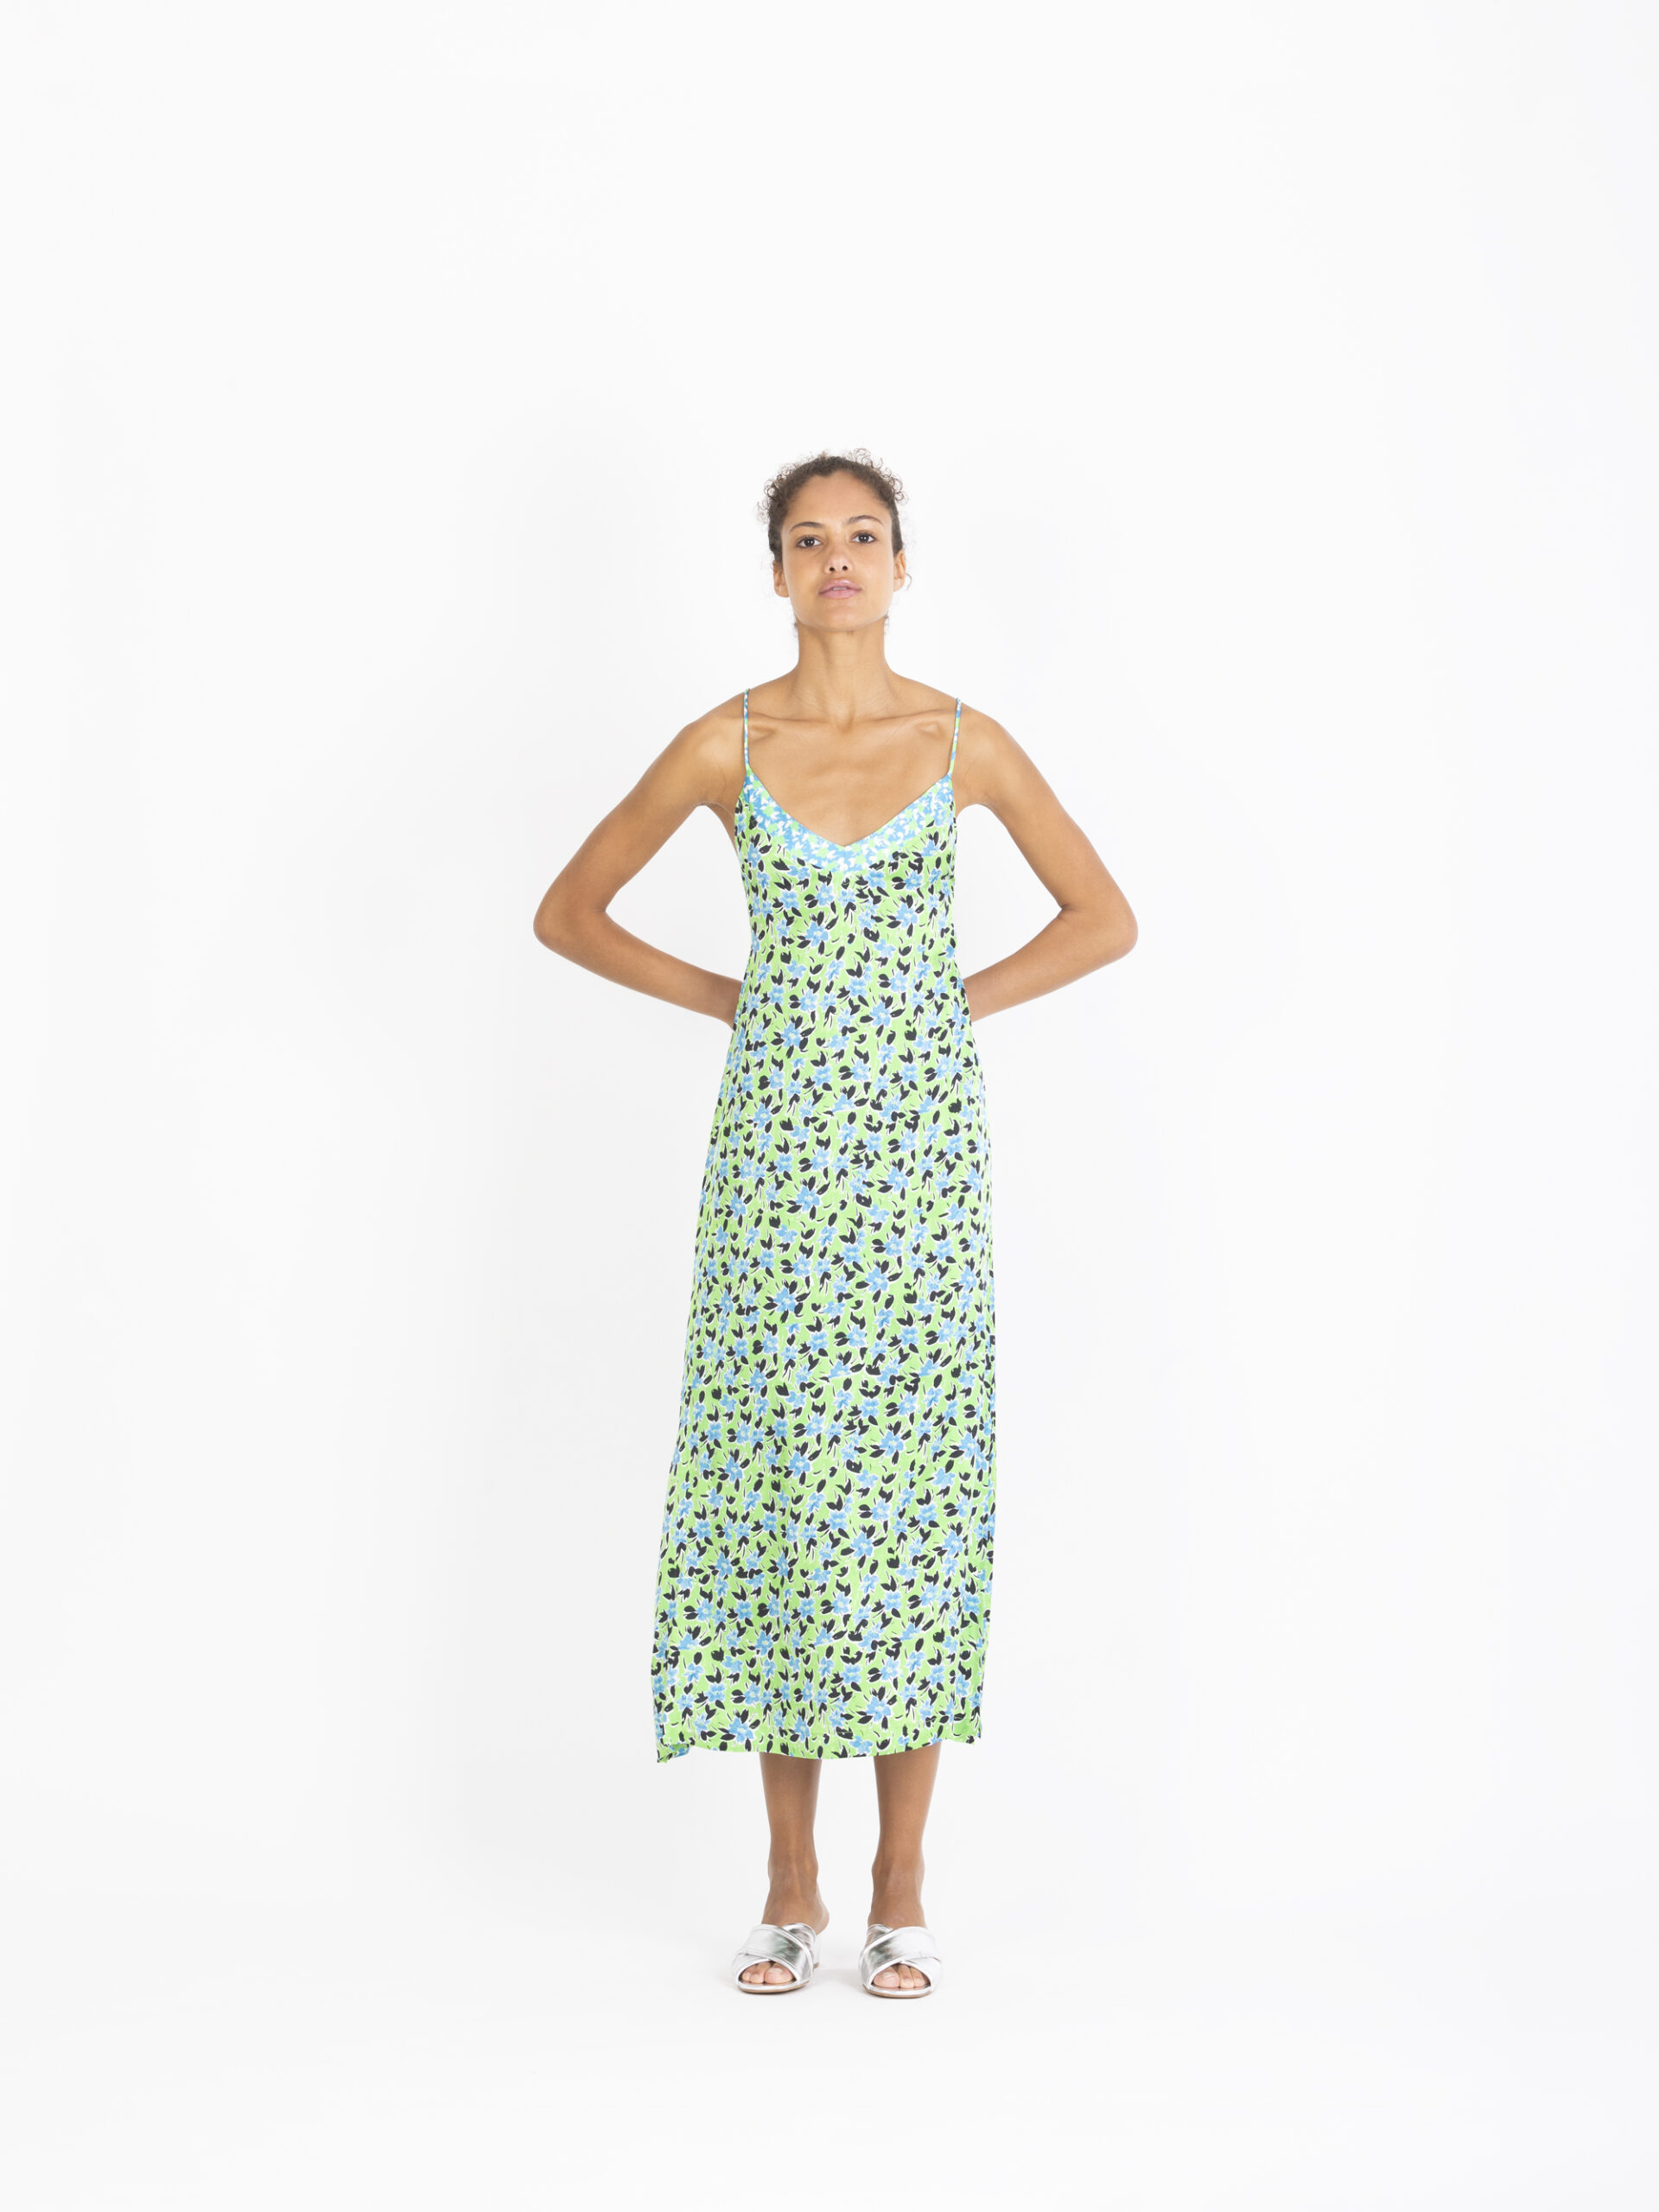 chelsy-green-floral-dress-backless-thin-straps-satin-suncoo-matchboxathens